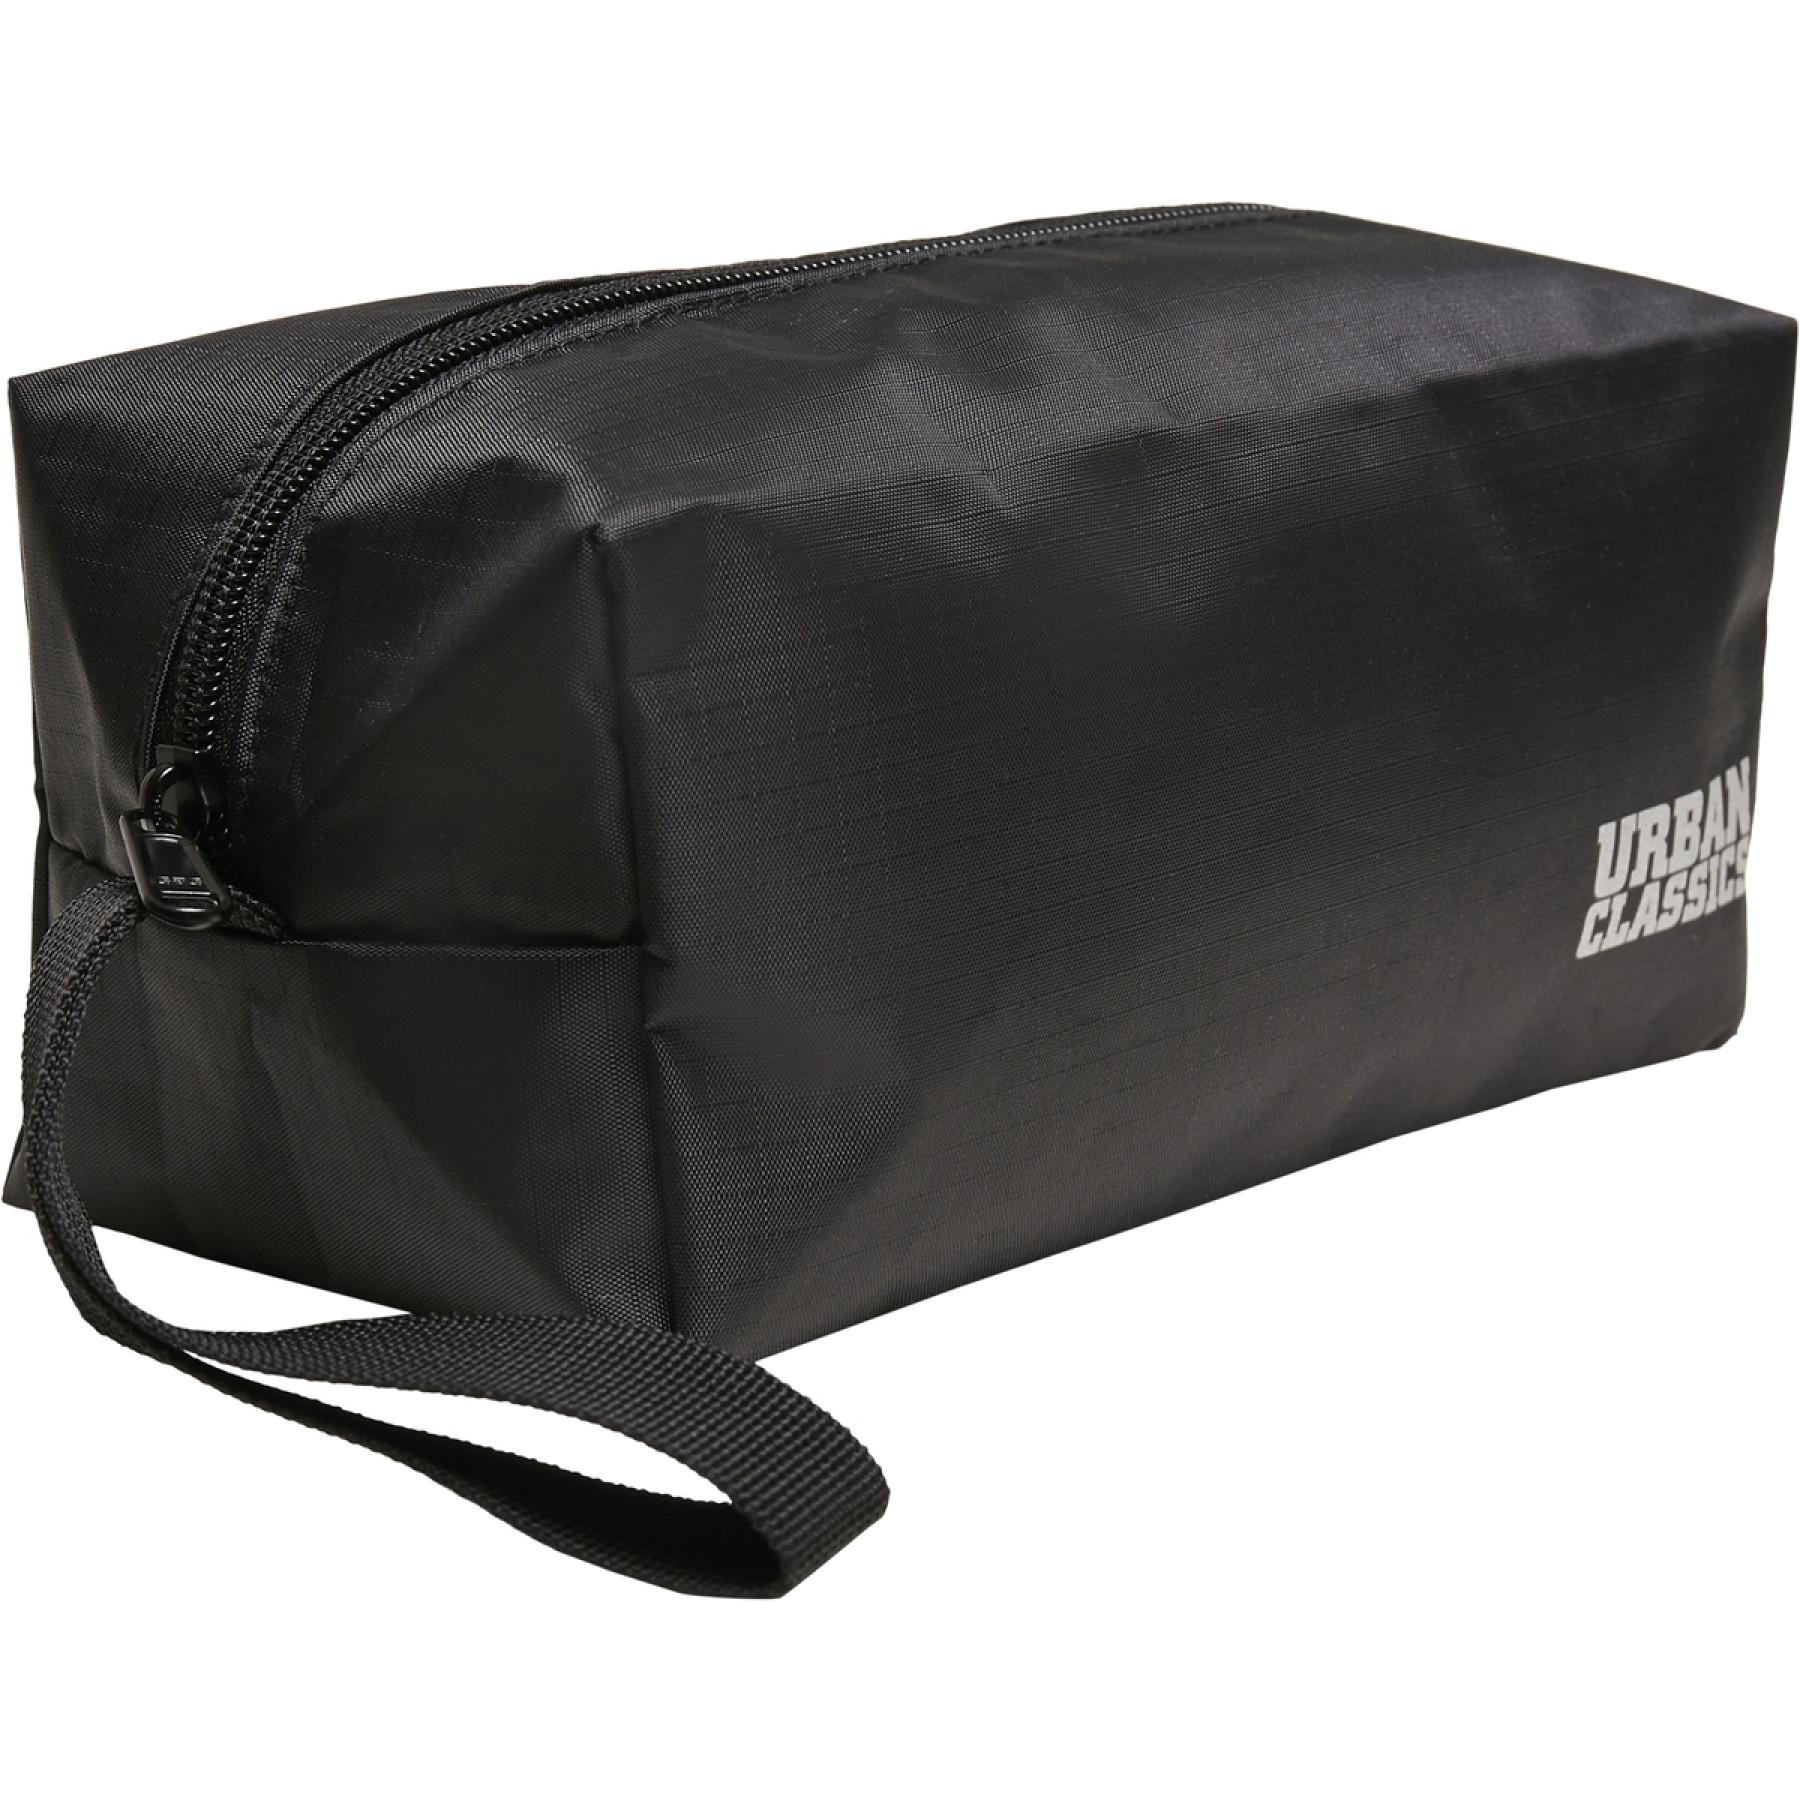 Sac Urban Classics recyclable indéchirable cosmetic